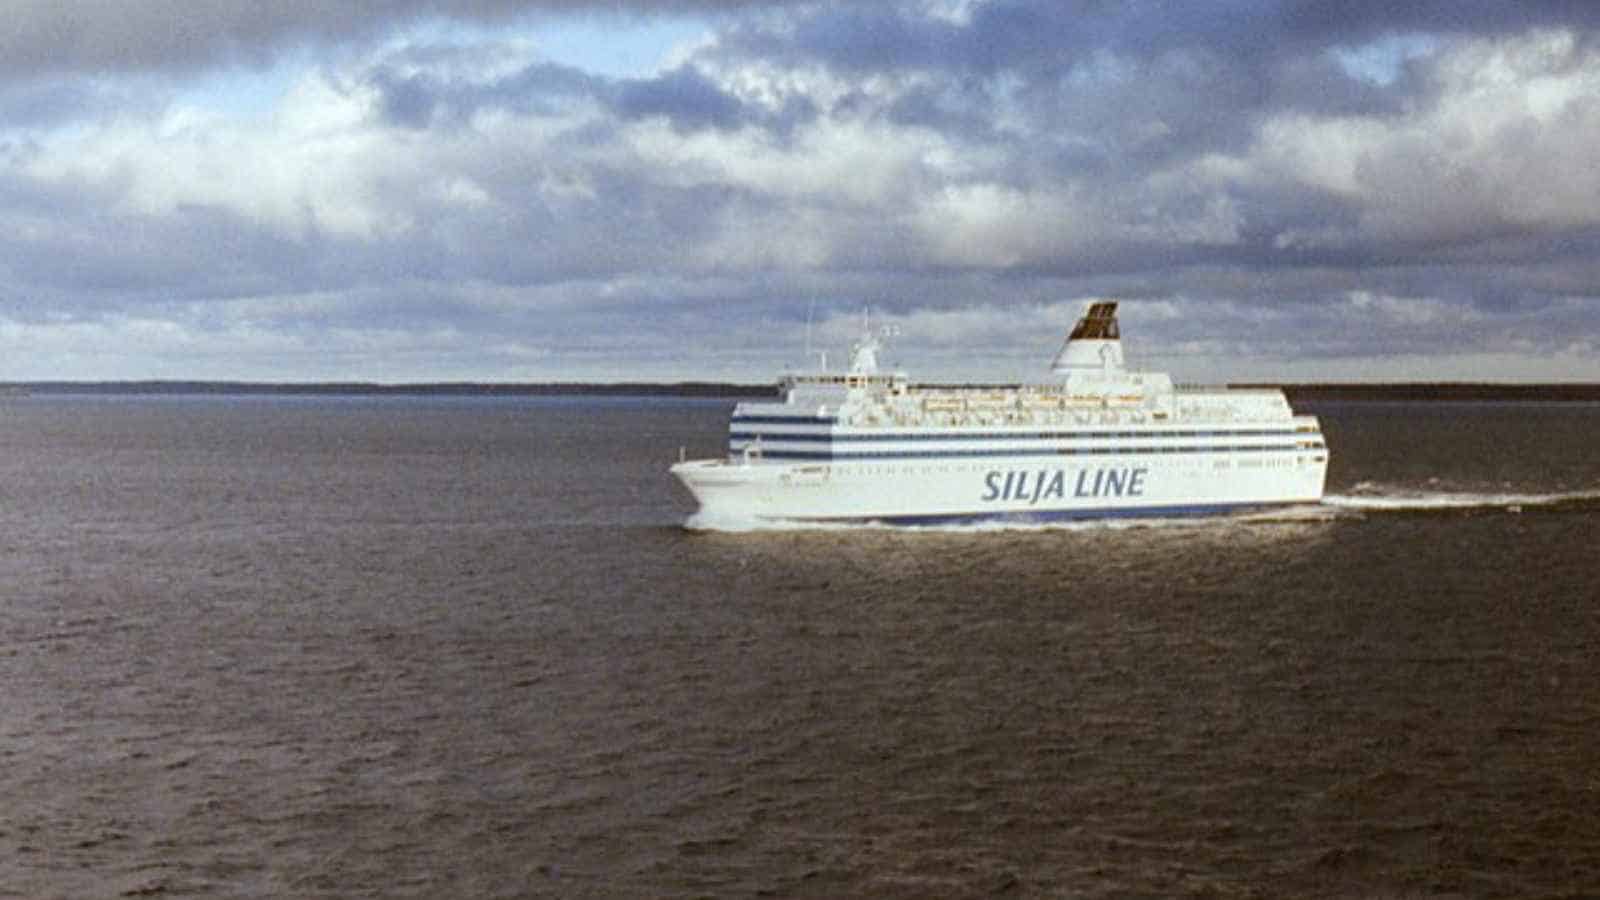 <p>In September 1994, the MS Estonia ferry sank in the Baltic Sea while en route from Tallinn to Stockholm. Over 850 people lost their lives, making it one of the deadliest European maritime disasters. The crew of MS Estonia failed to follow proper emergency procedures, such as closing the watertight doors and activating the distress signal immediately after realizing the ship was taking on water. This delay in response greatly reduced the chances of survival for passengers.</p>